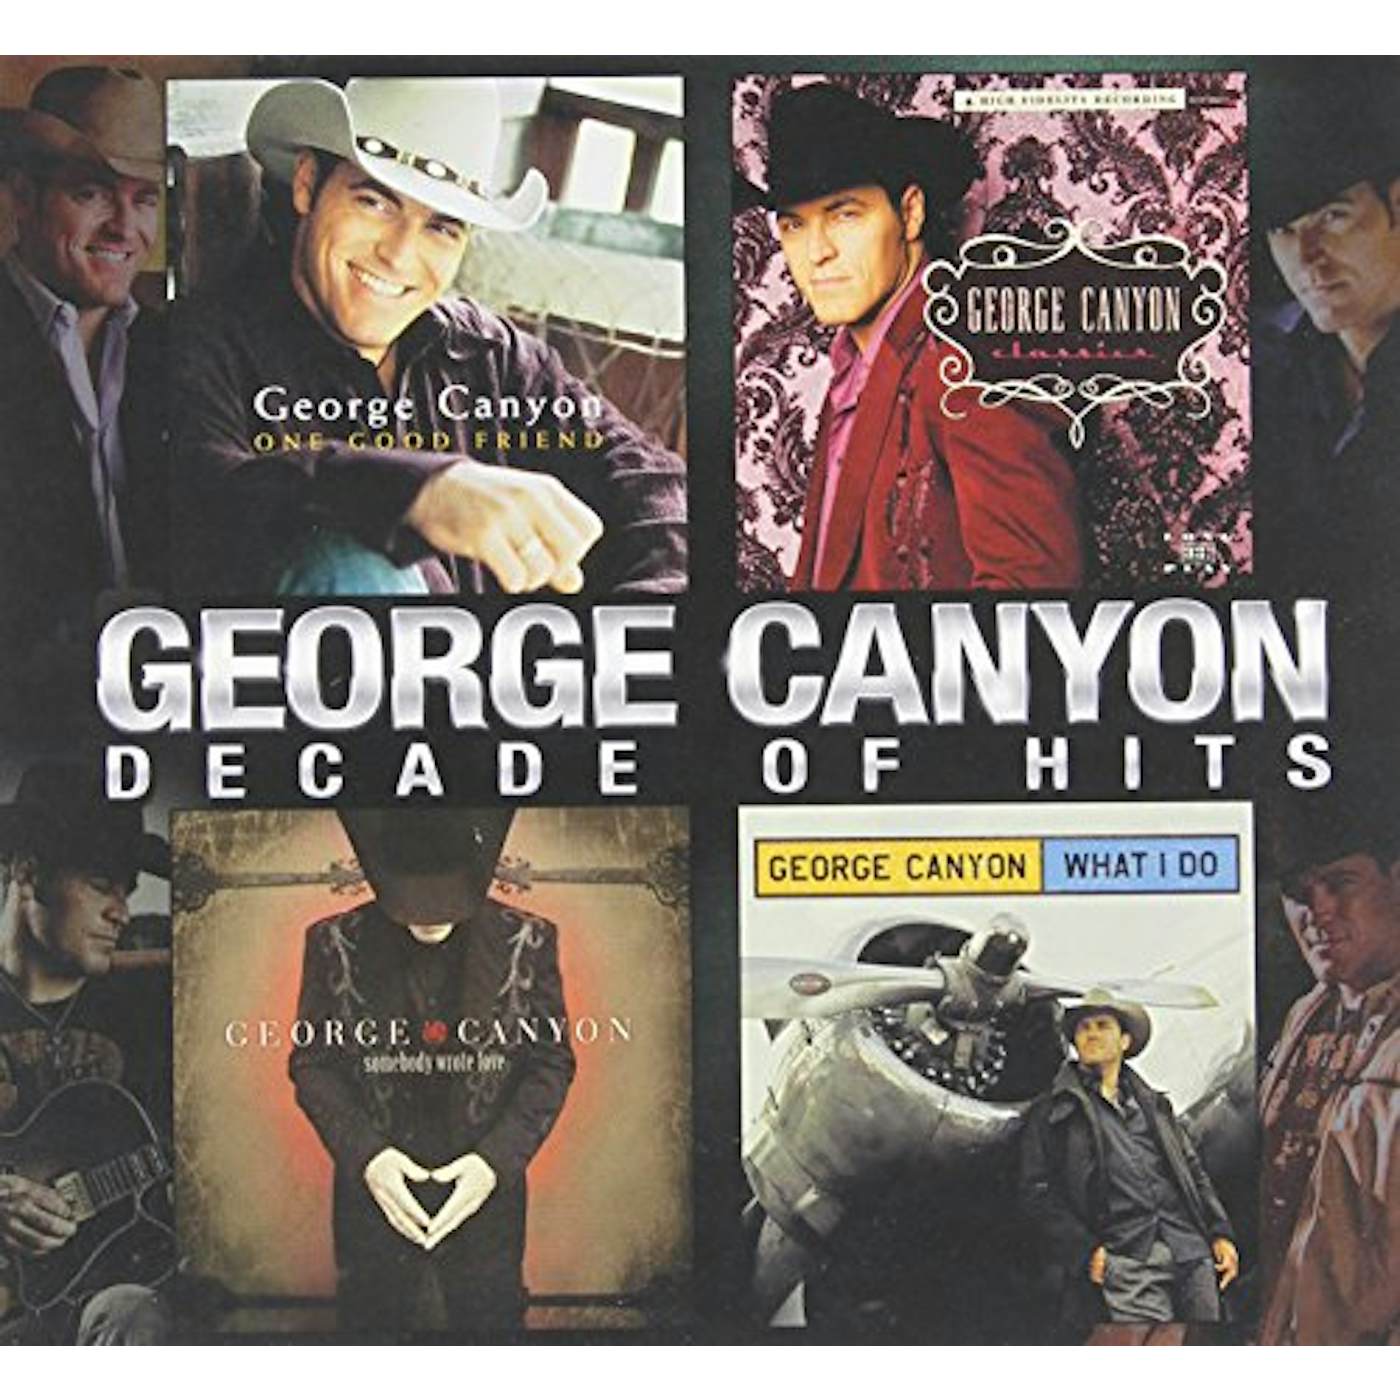 George Canyon DECADE OF HITS CD